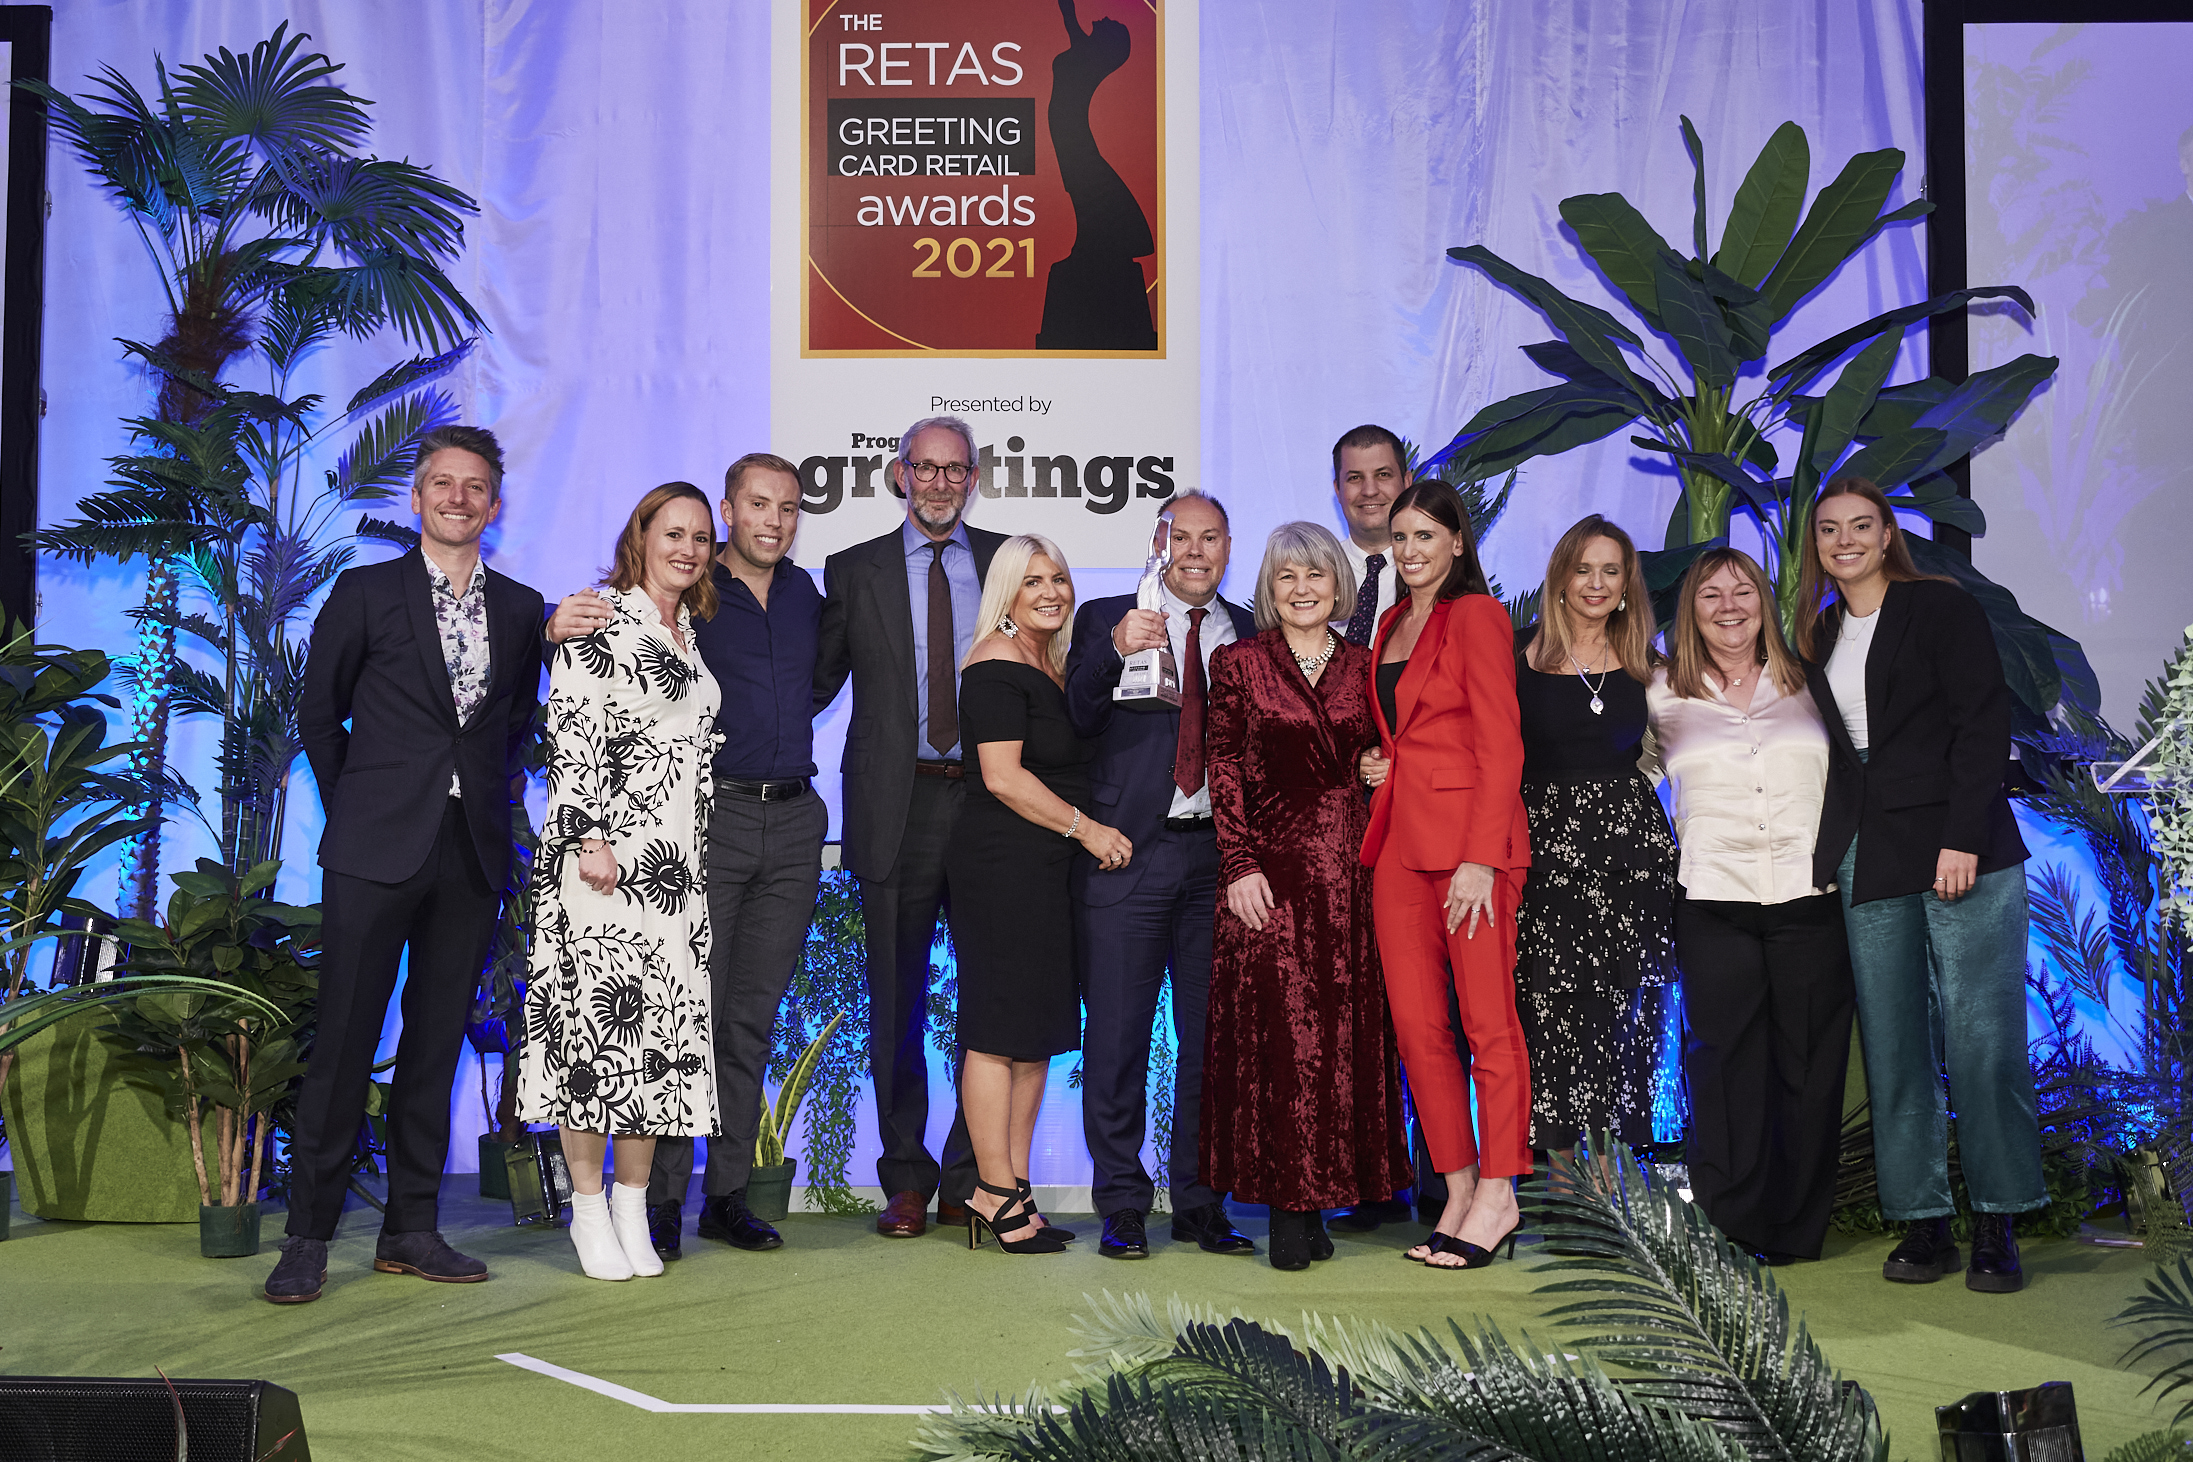 Above: The Cardzone team took to the stage to accept the top trophy from (fourth left) Ged Mace, md of The Art File, sponsor of this award category.